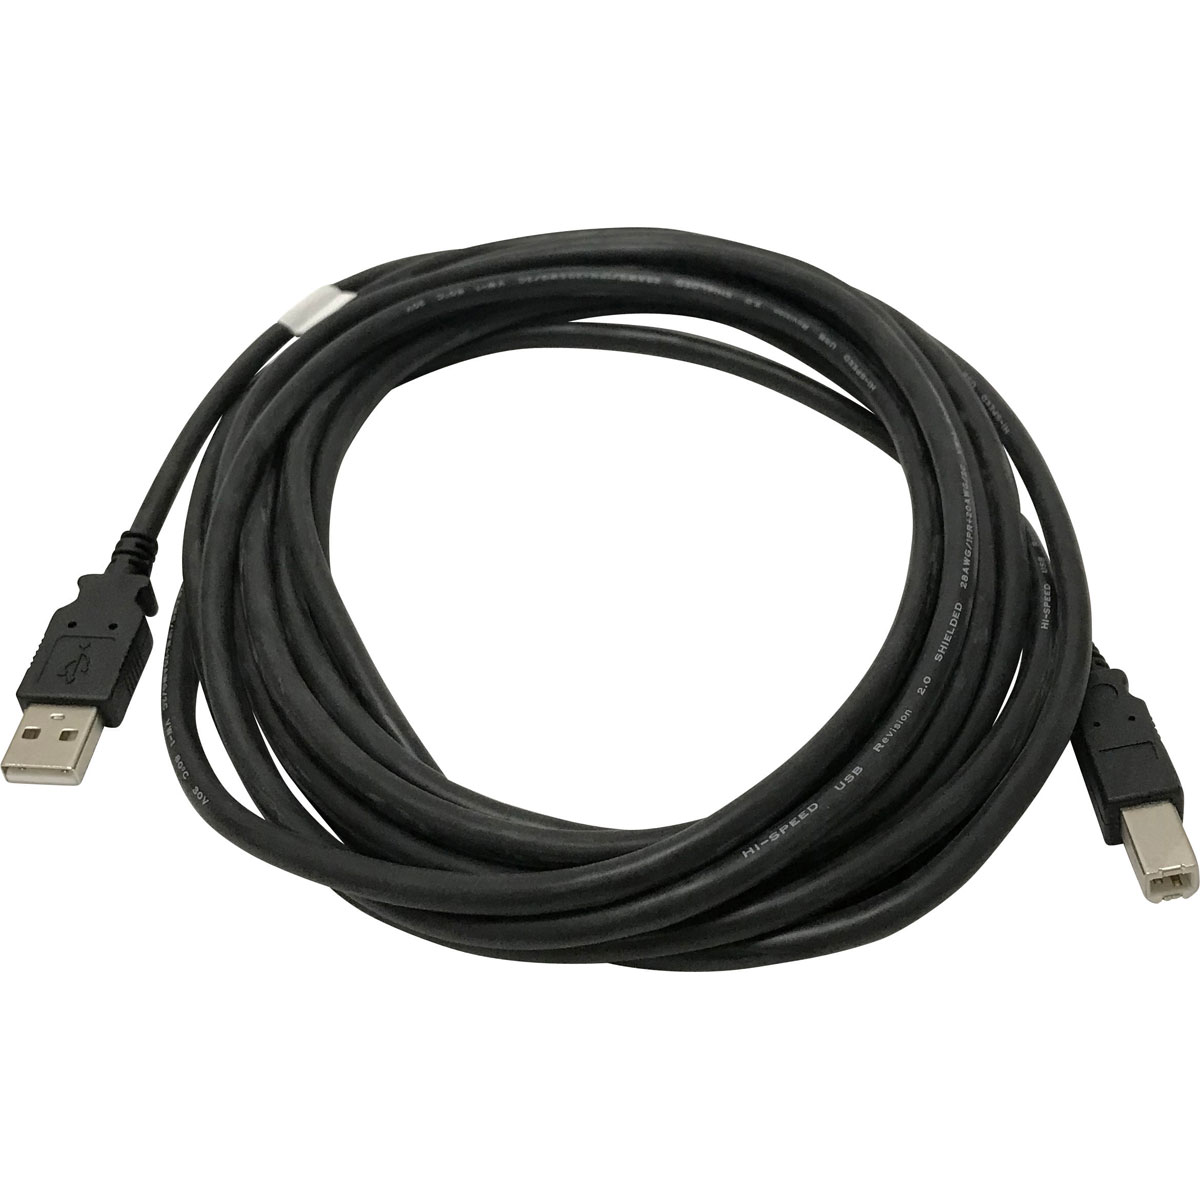 CABLE,USB,FOR EXTL DISPLAY,5M